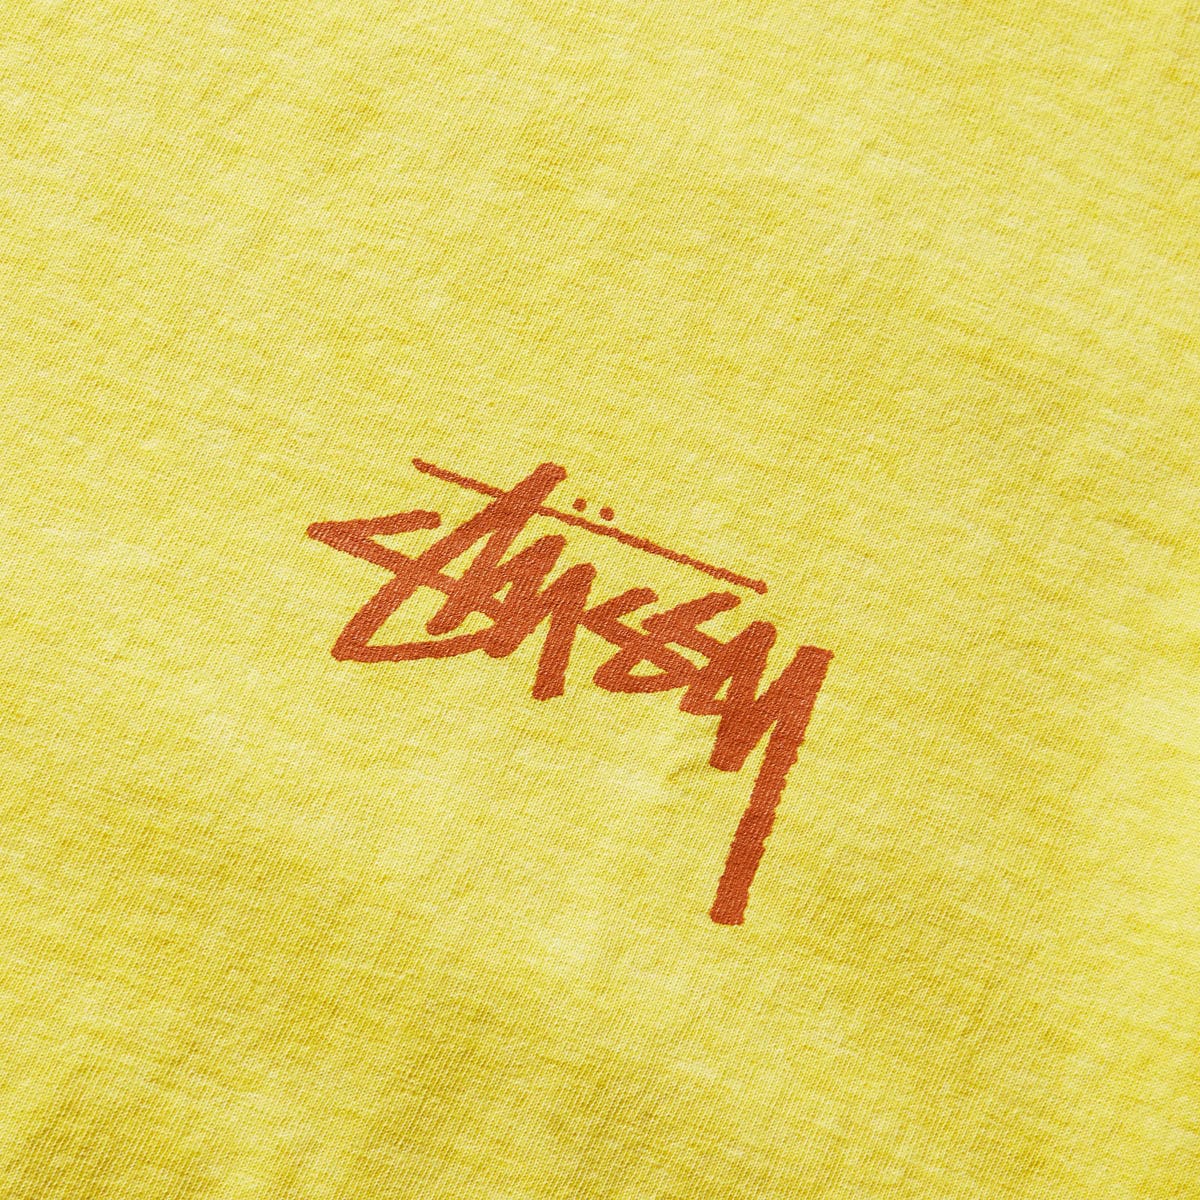 Stüssy T-Shirts HOW WERE LIVIN PIG. DYED TEE